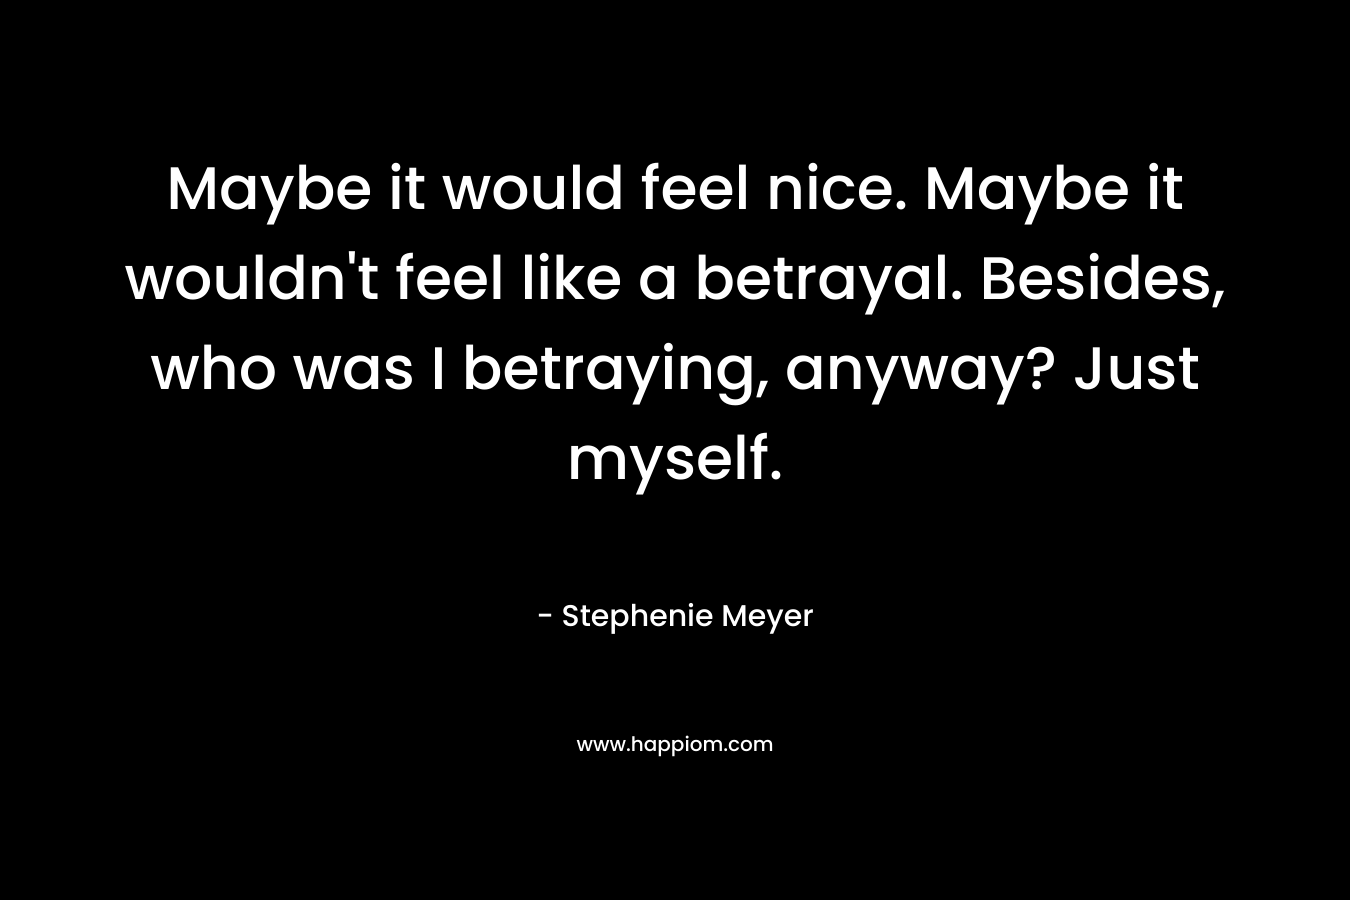 Maybe it would feel nice. Maybe it wouldn’t feel like a betrayal. Besides, who was I betraying, anyway? Just myself. – Stephenie Meyer